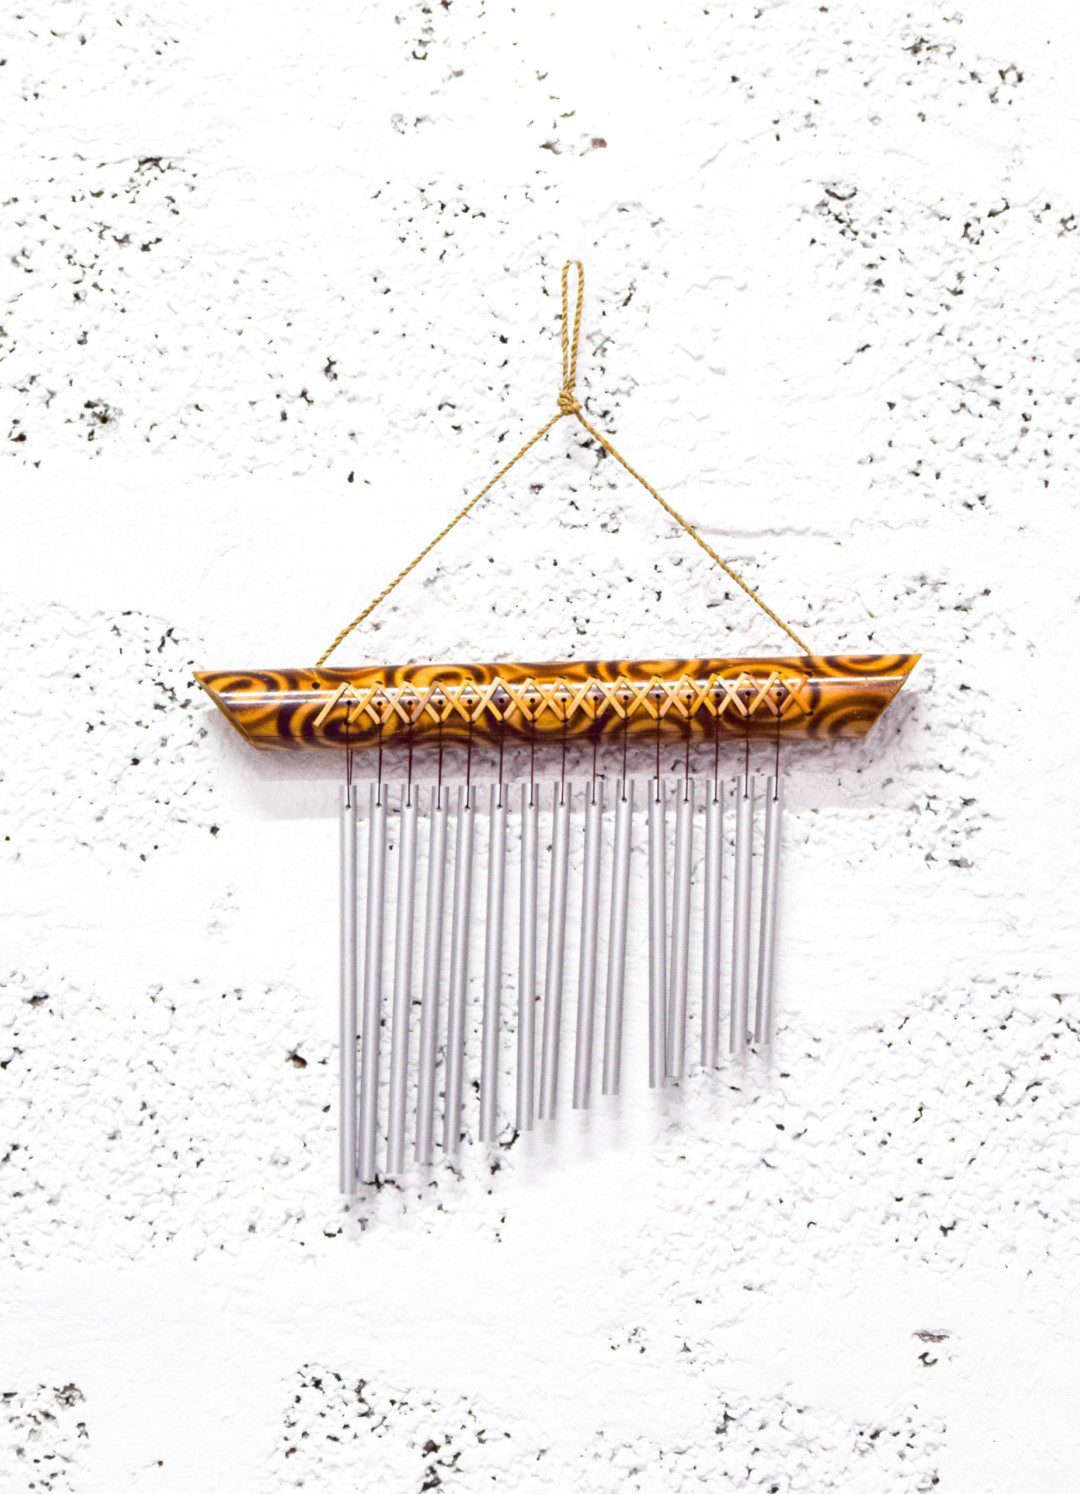 Wind Chime Bamboo at Gaia Center Cyprus.